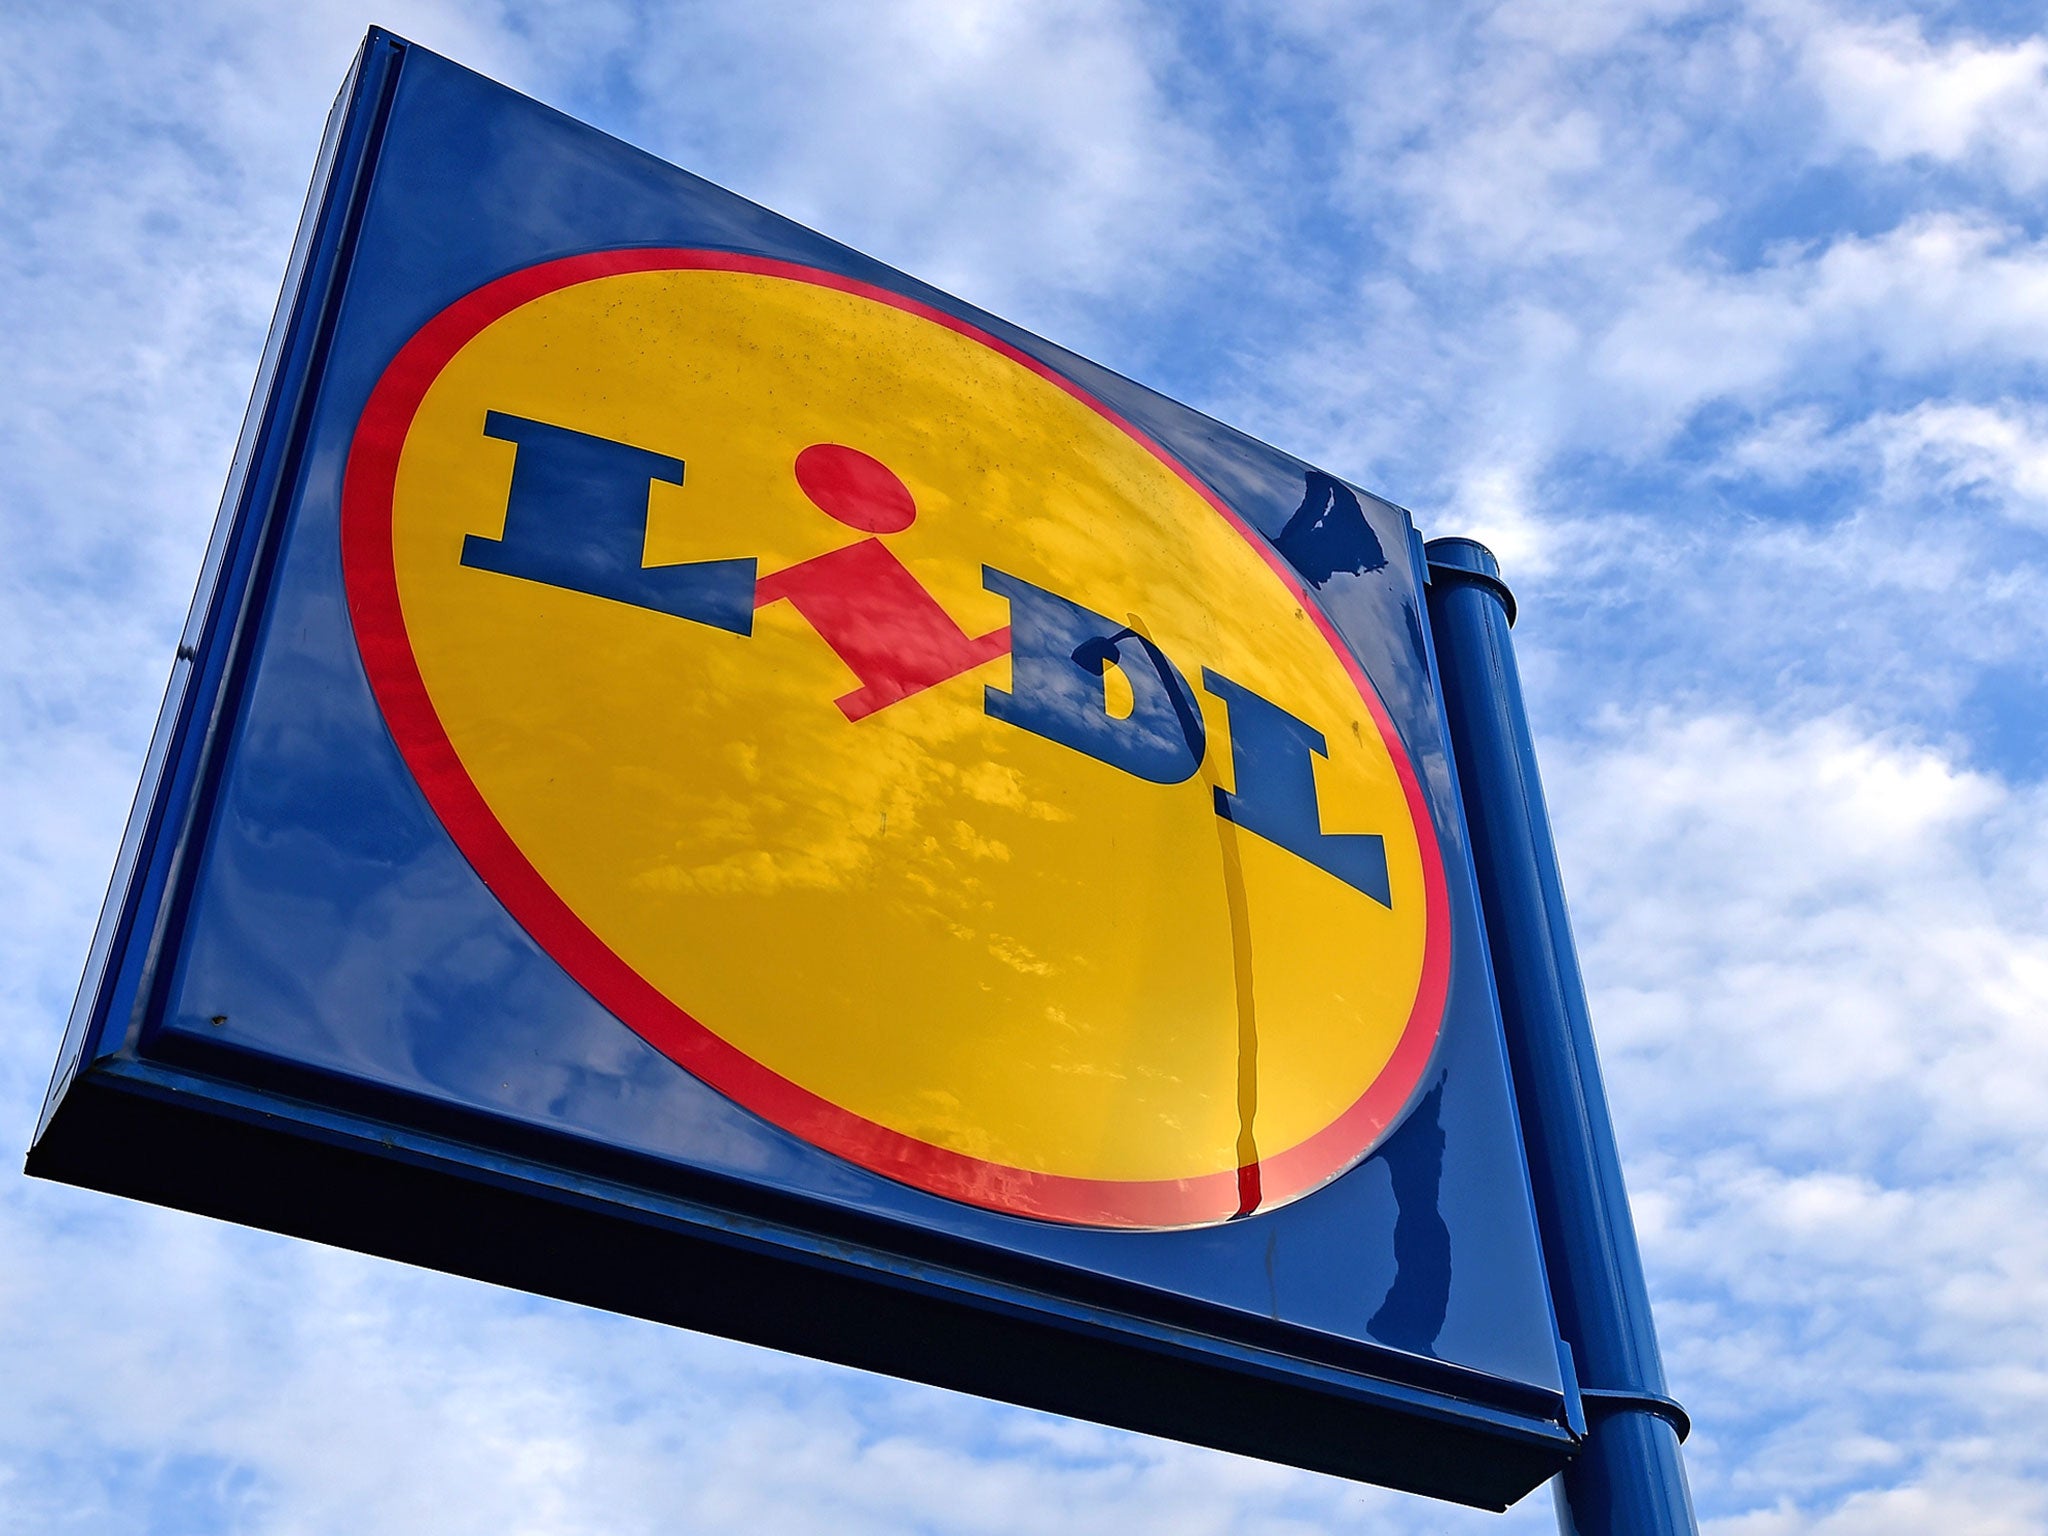 Lidl represents a serious threat to the Big Four